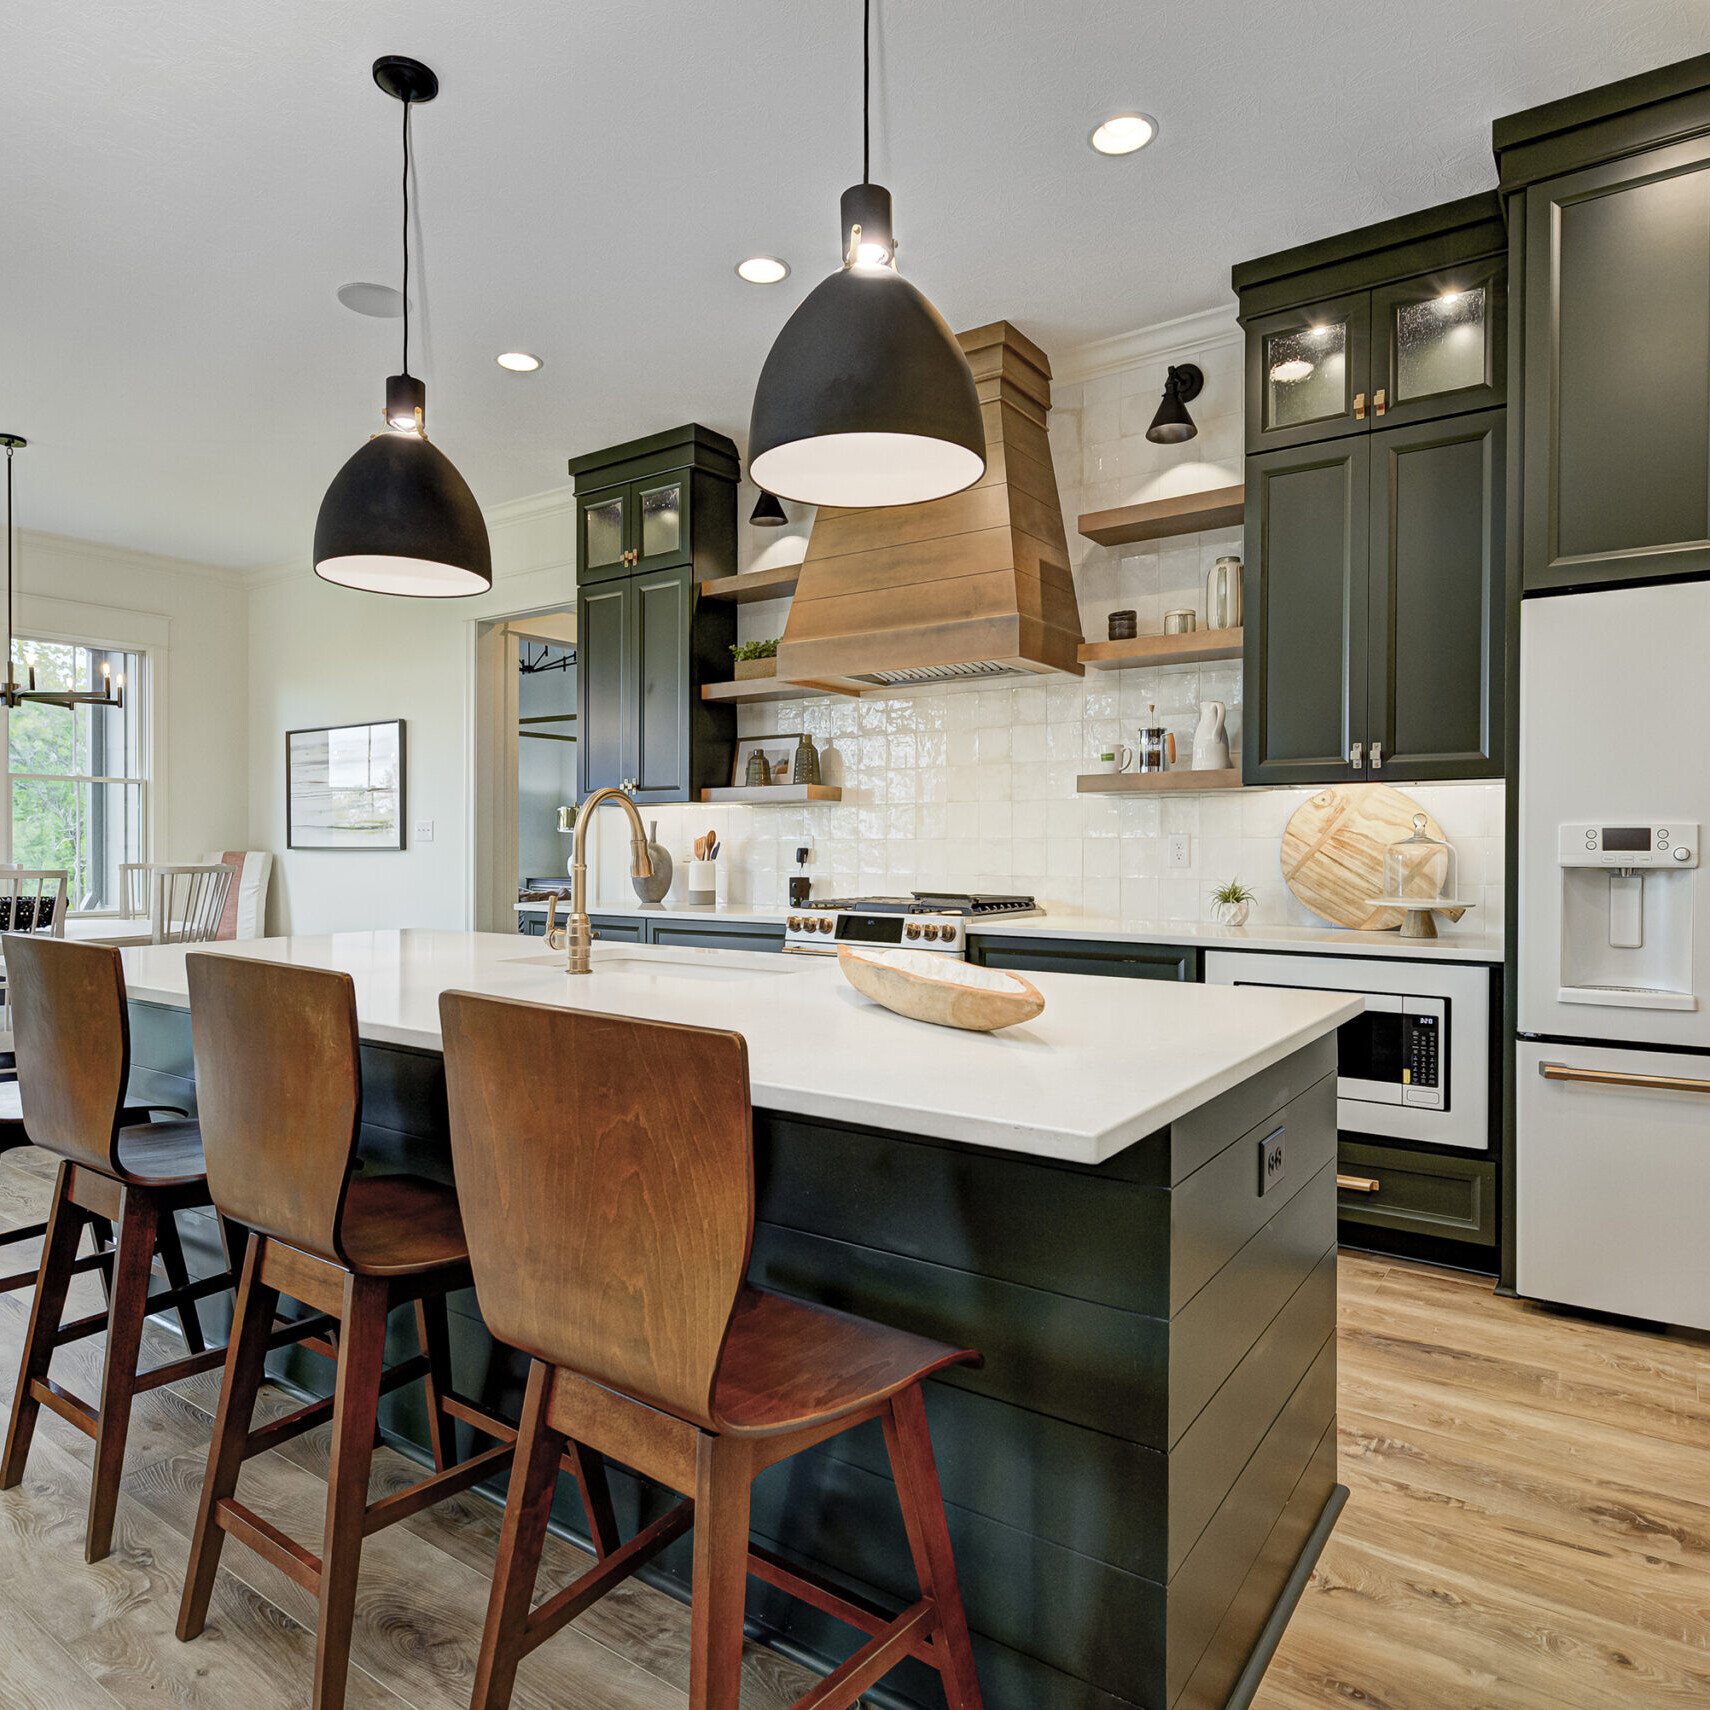 A kitchen with green cabinets and wood floors designed by a Custom Home Builder Fishers Indiana.